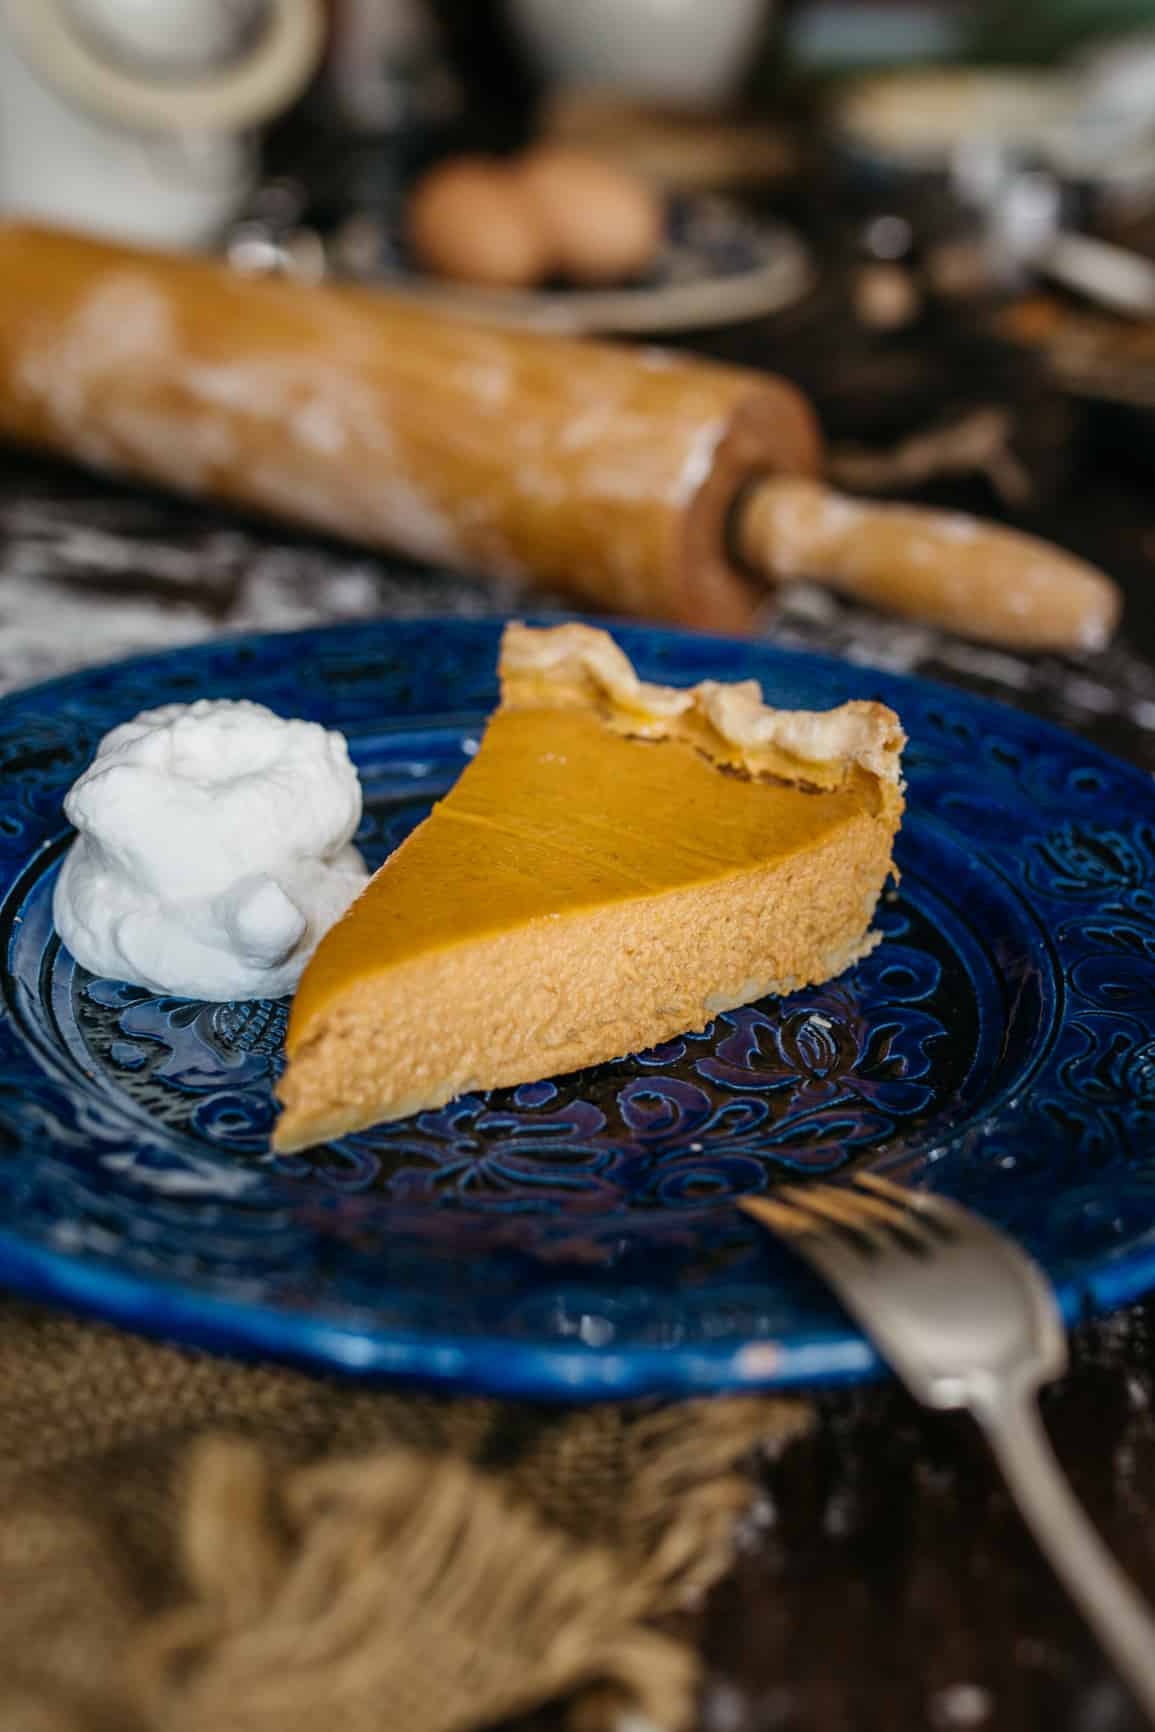 This homemade pumpkin pie recipe is the perfect dessert to enjoy in the fall especially during Thanksgiving and Christmas. It's one of my favorite holiday desserts I like to make from scratch. Click over to learn how to make this easy dessert!